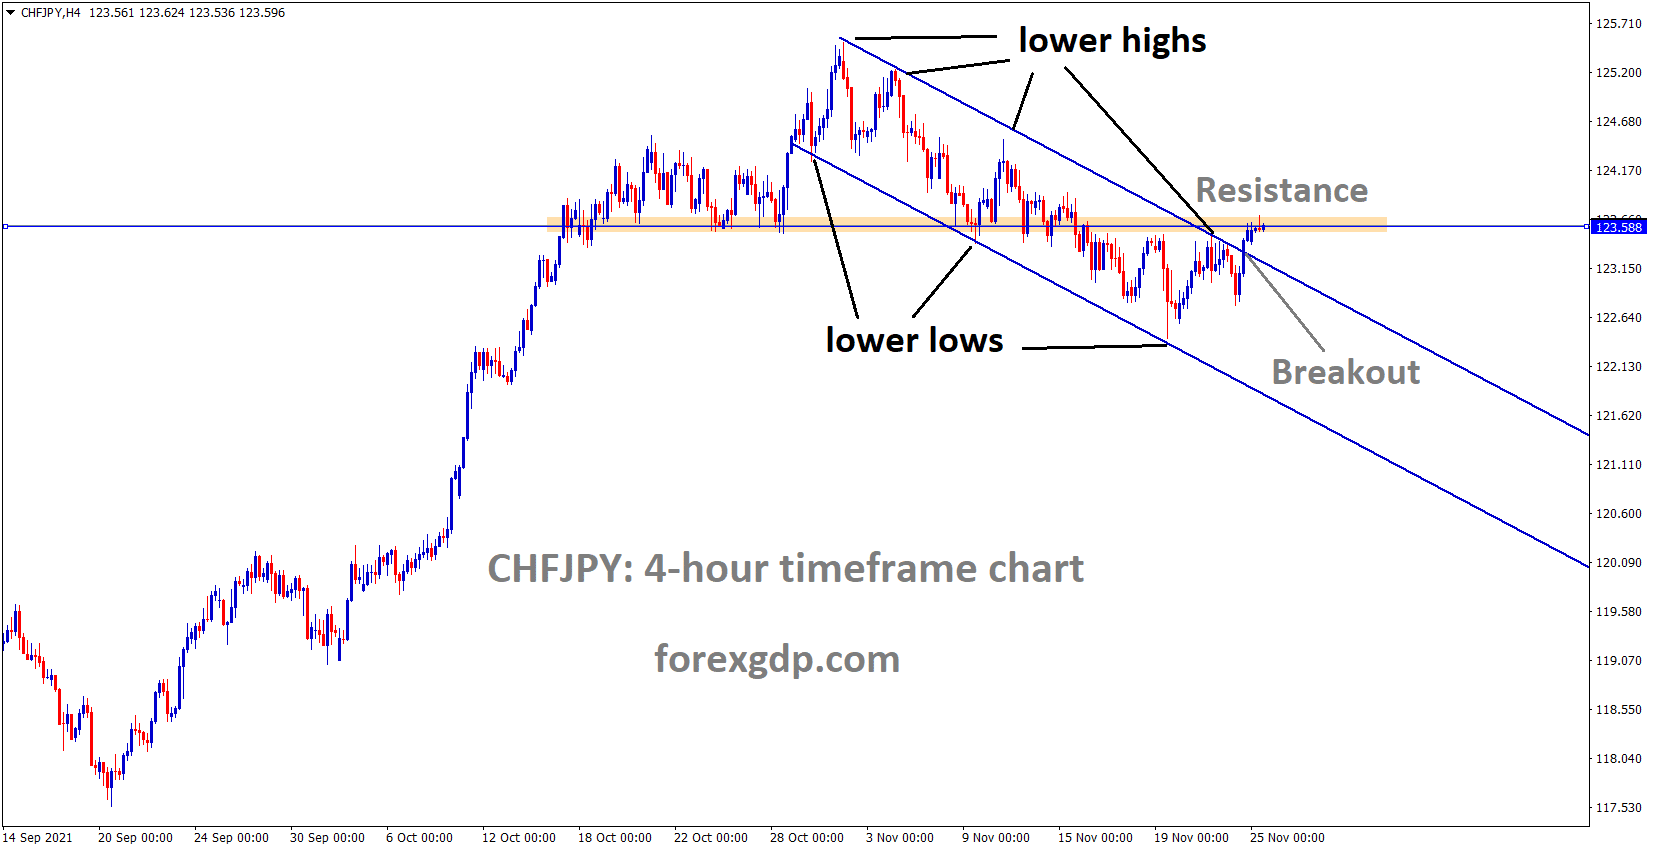 CHFJPY has broken the Descending channel and the market reached the Horizontal Resistance area.